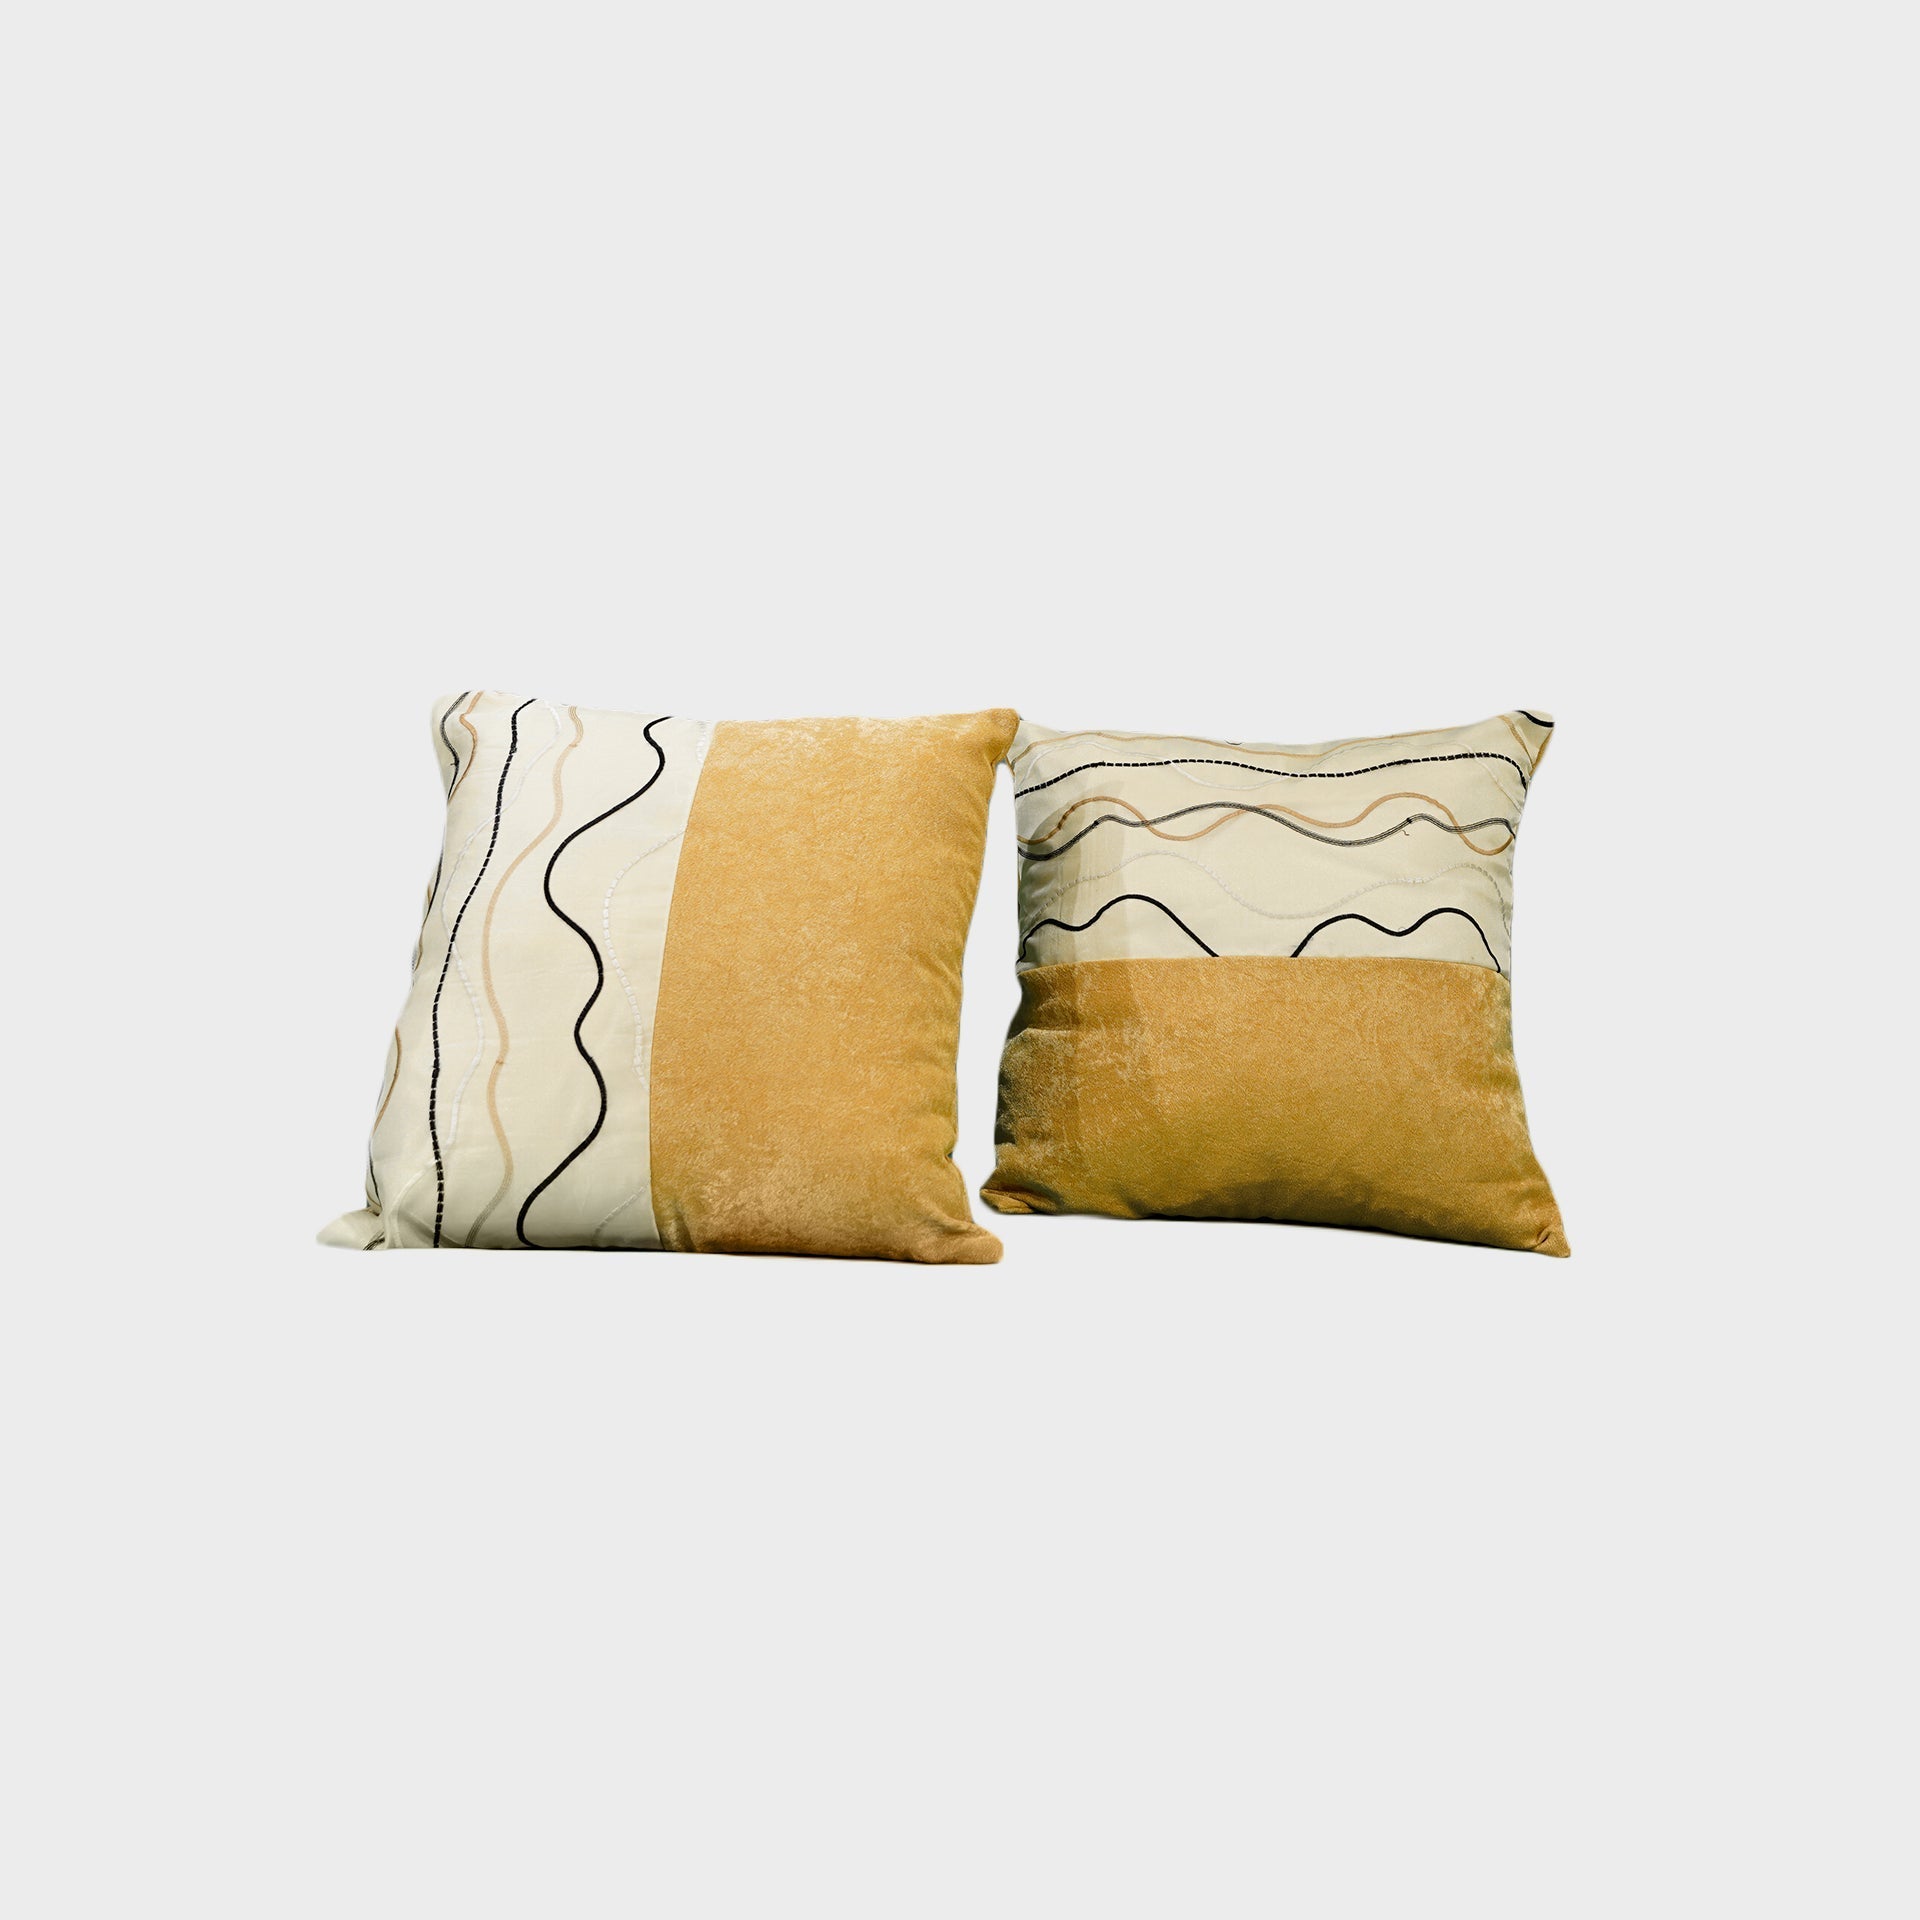 Wavy Beach Curls Cushion Cover Sets at Kamakhyaa by Aetherea. This item is Abstract, Beige, Cotton, Cushion covers, Half & Half, Home, Lines, Plain, Solid, Upcycled, Wavy